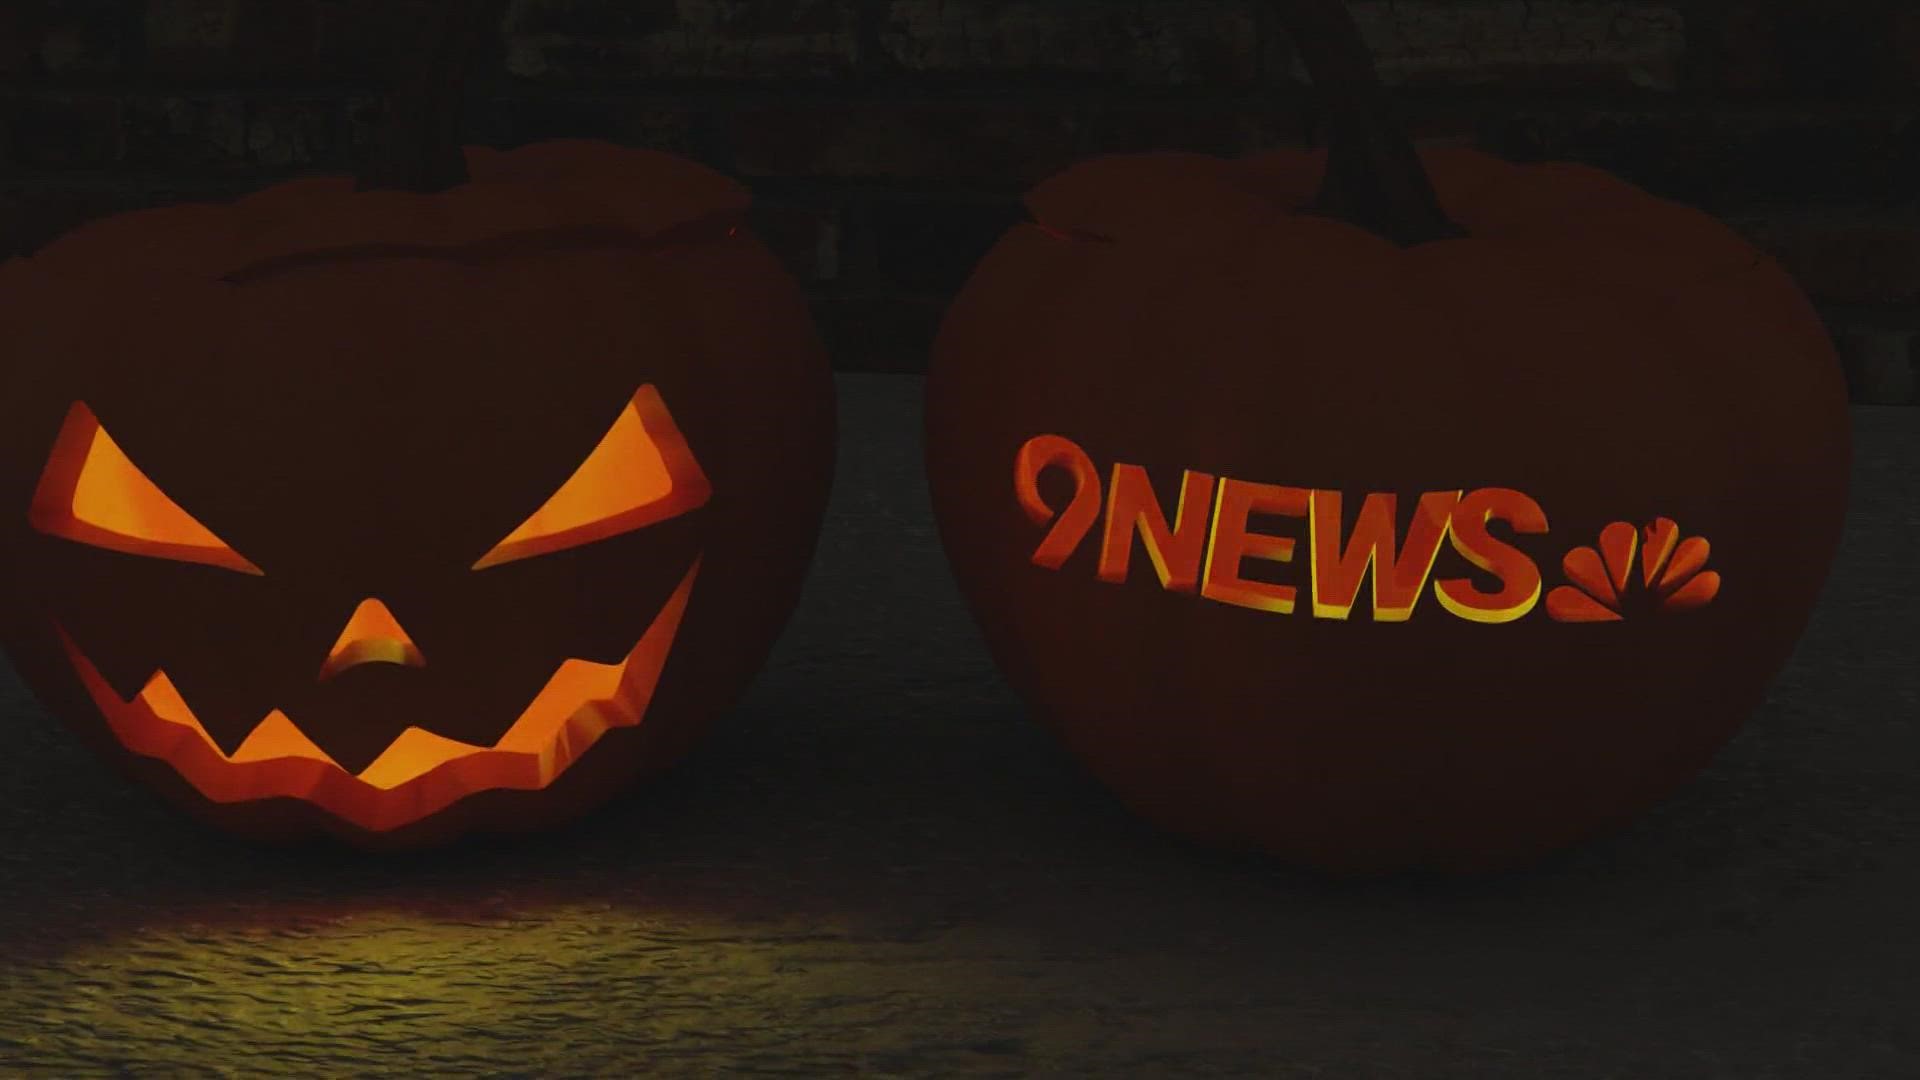 The 9NEWS Morning show team paid special tribute to Gary Shapiro with their Halloween costumes this year.